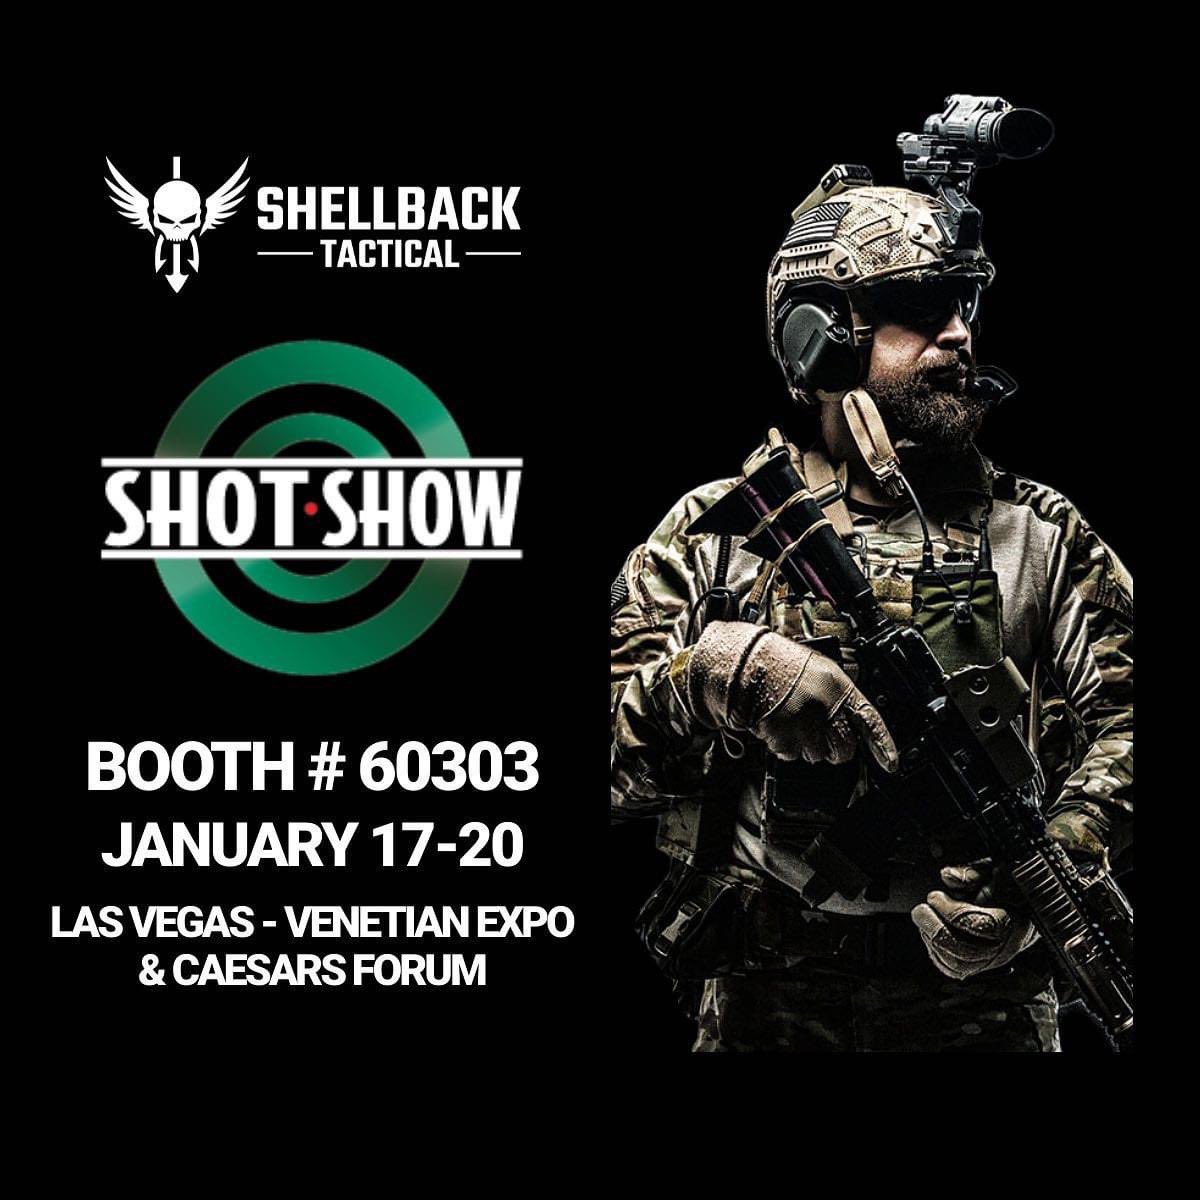 Vegas bound for #shotshow 2023! Come visit us at booth 60303. #shellbacktactical #tactical #platecarrier #bodyarmor #tacticalgear